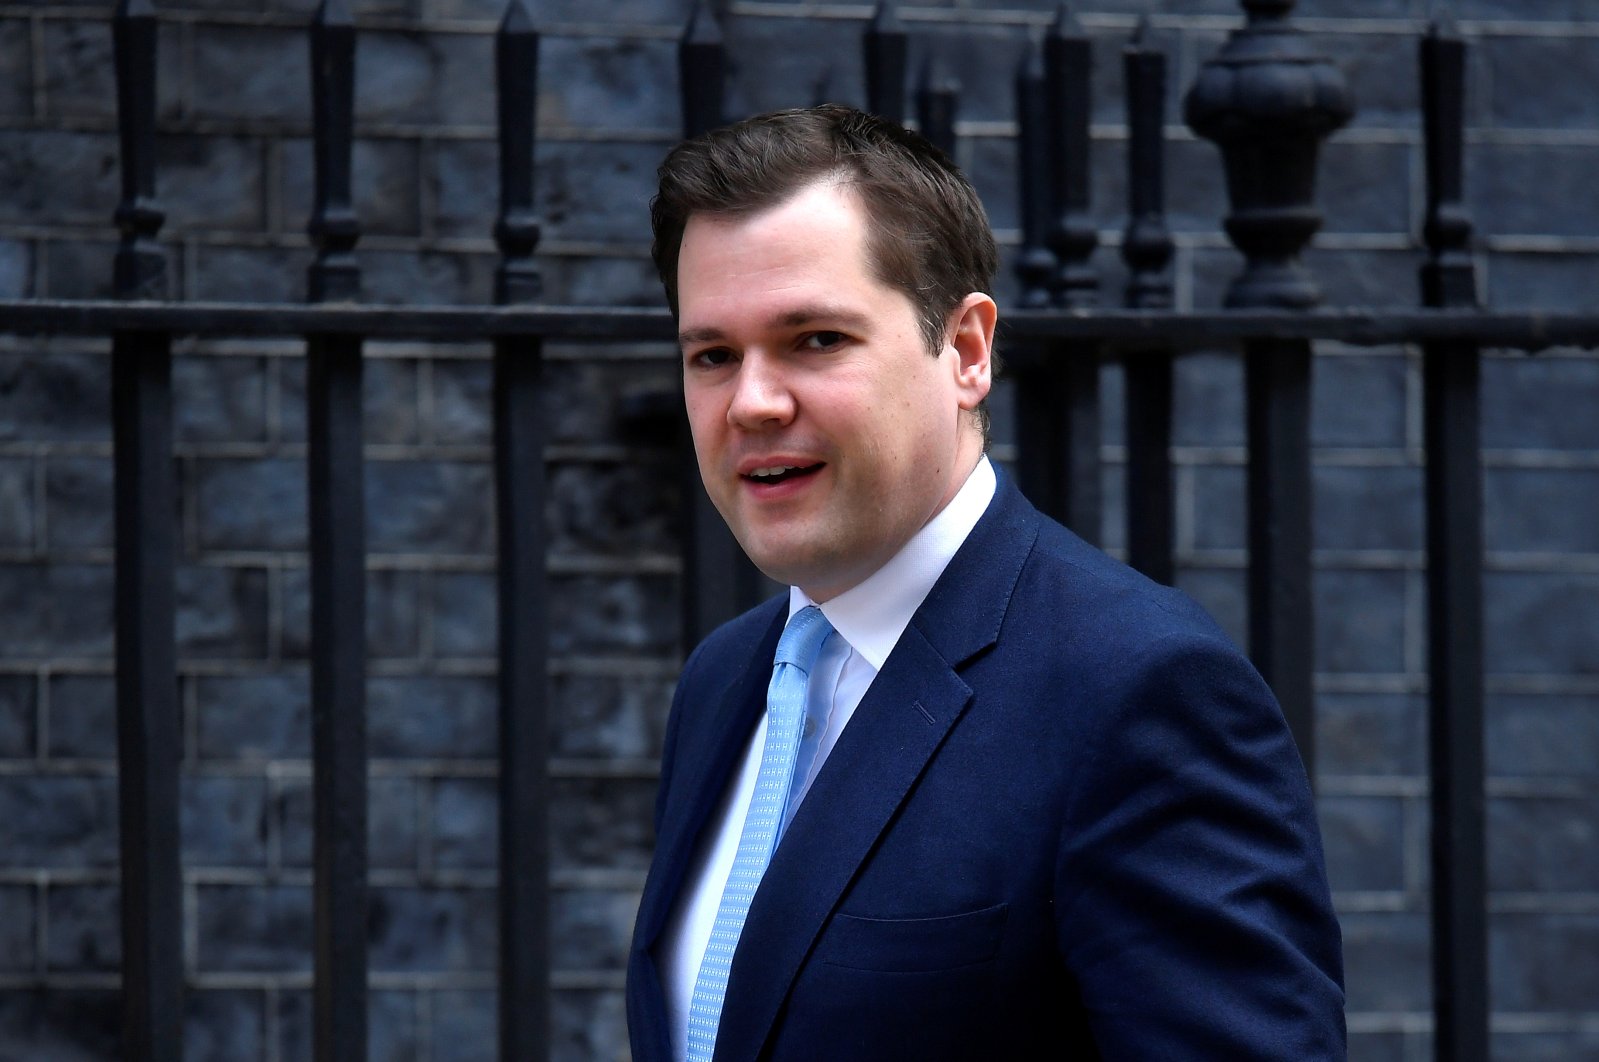 Secretary of State for Housing, Communities and Local Government Robert Jenrick arrives on Downing Street, following the outbreak of the coronavirus, London, Britain, June 9, 2020. (Reuters Photo)